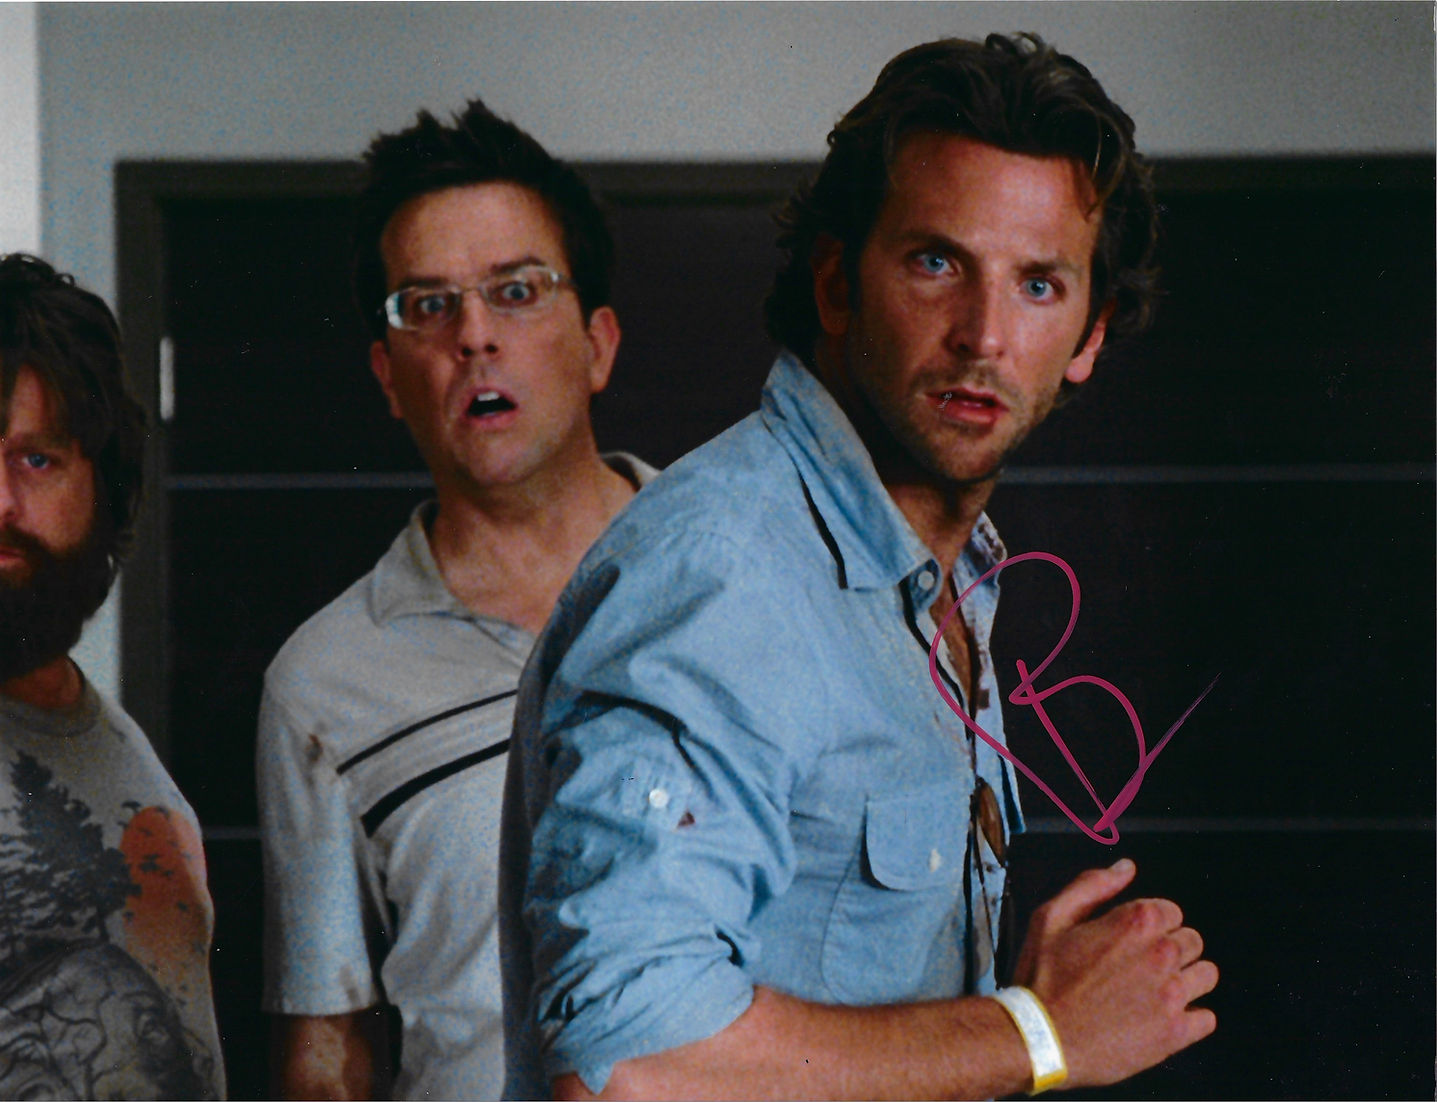 BRADLEY COOPER SIGNED 14x11 PHOTOGRAPH PHIL THE HANGOVER (AFTAL WITNESSED COA) 3